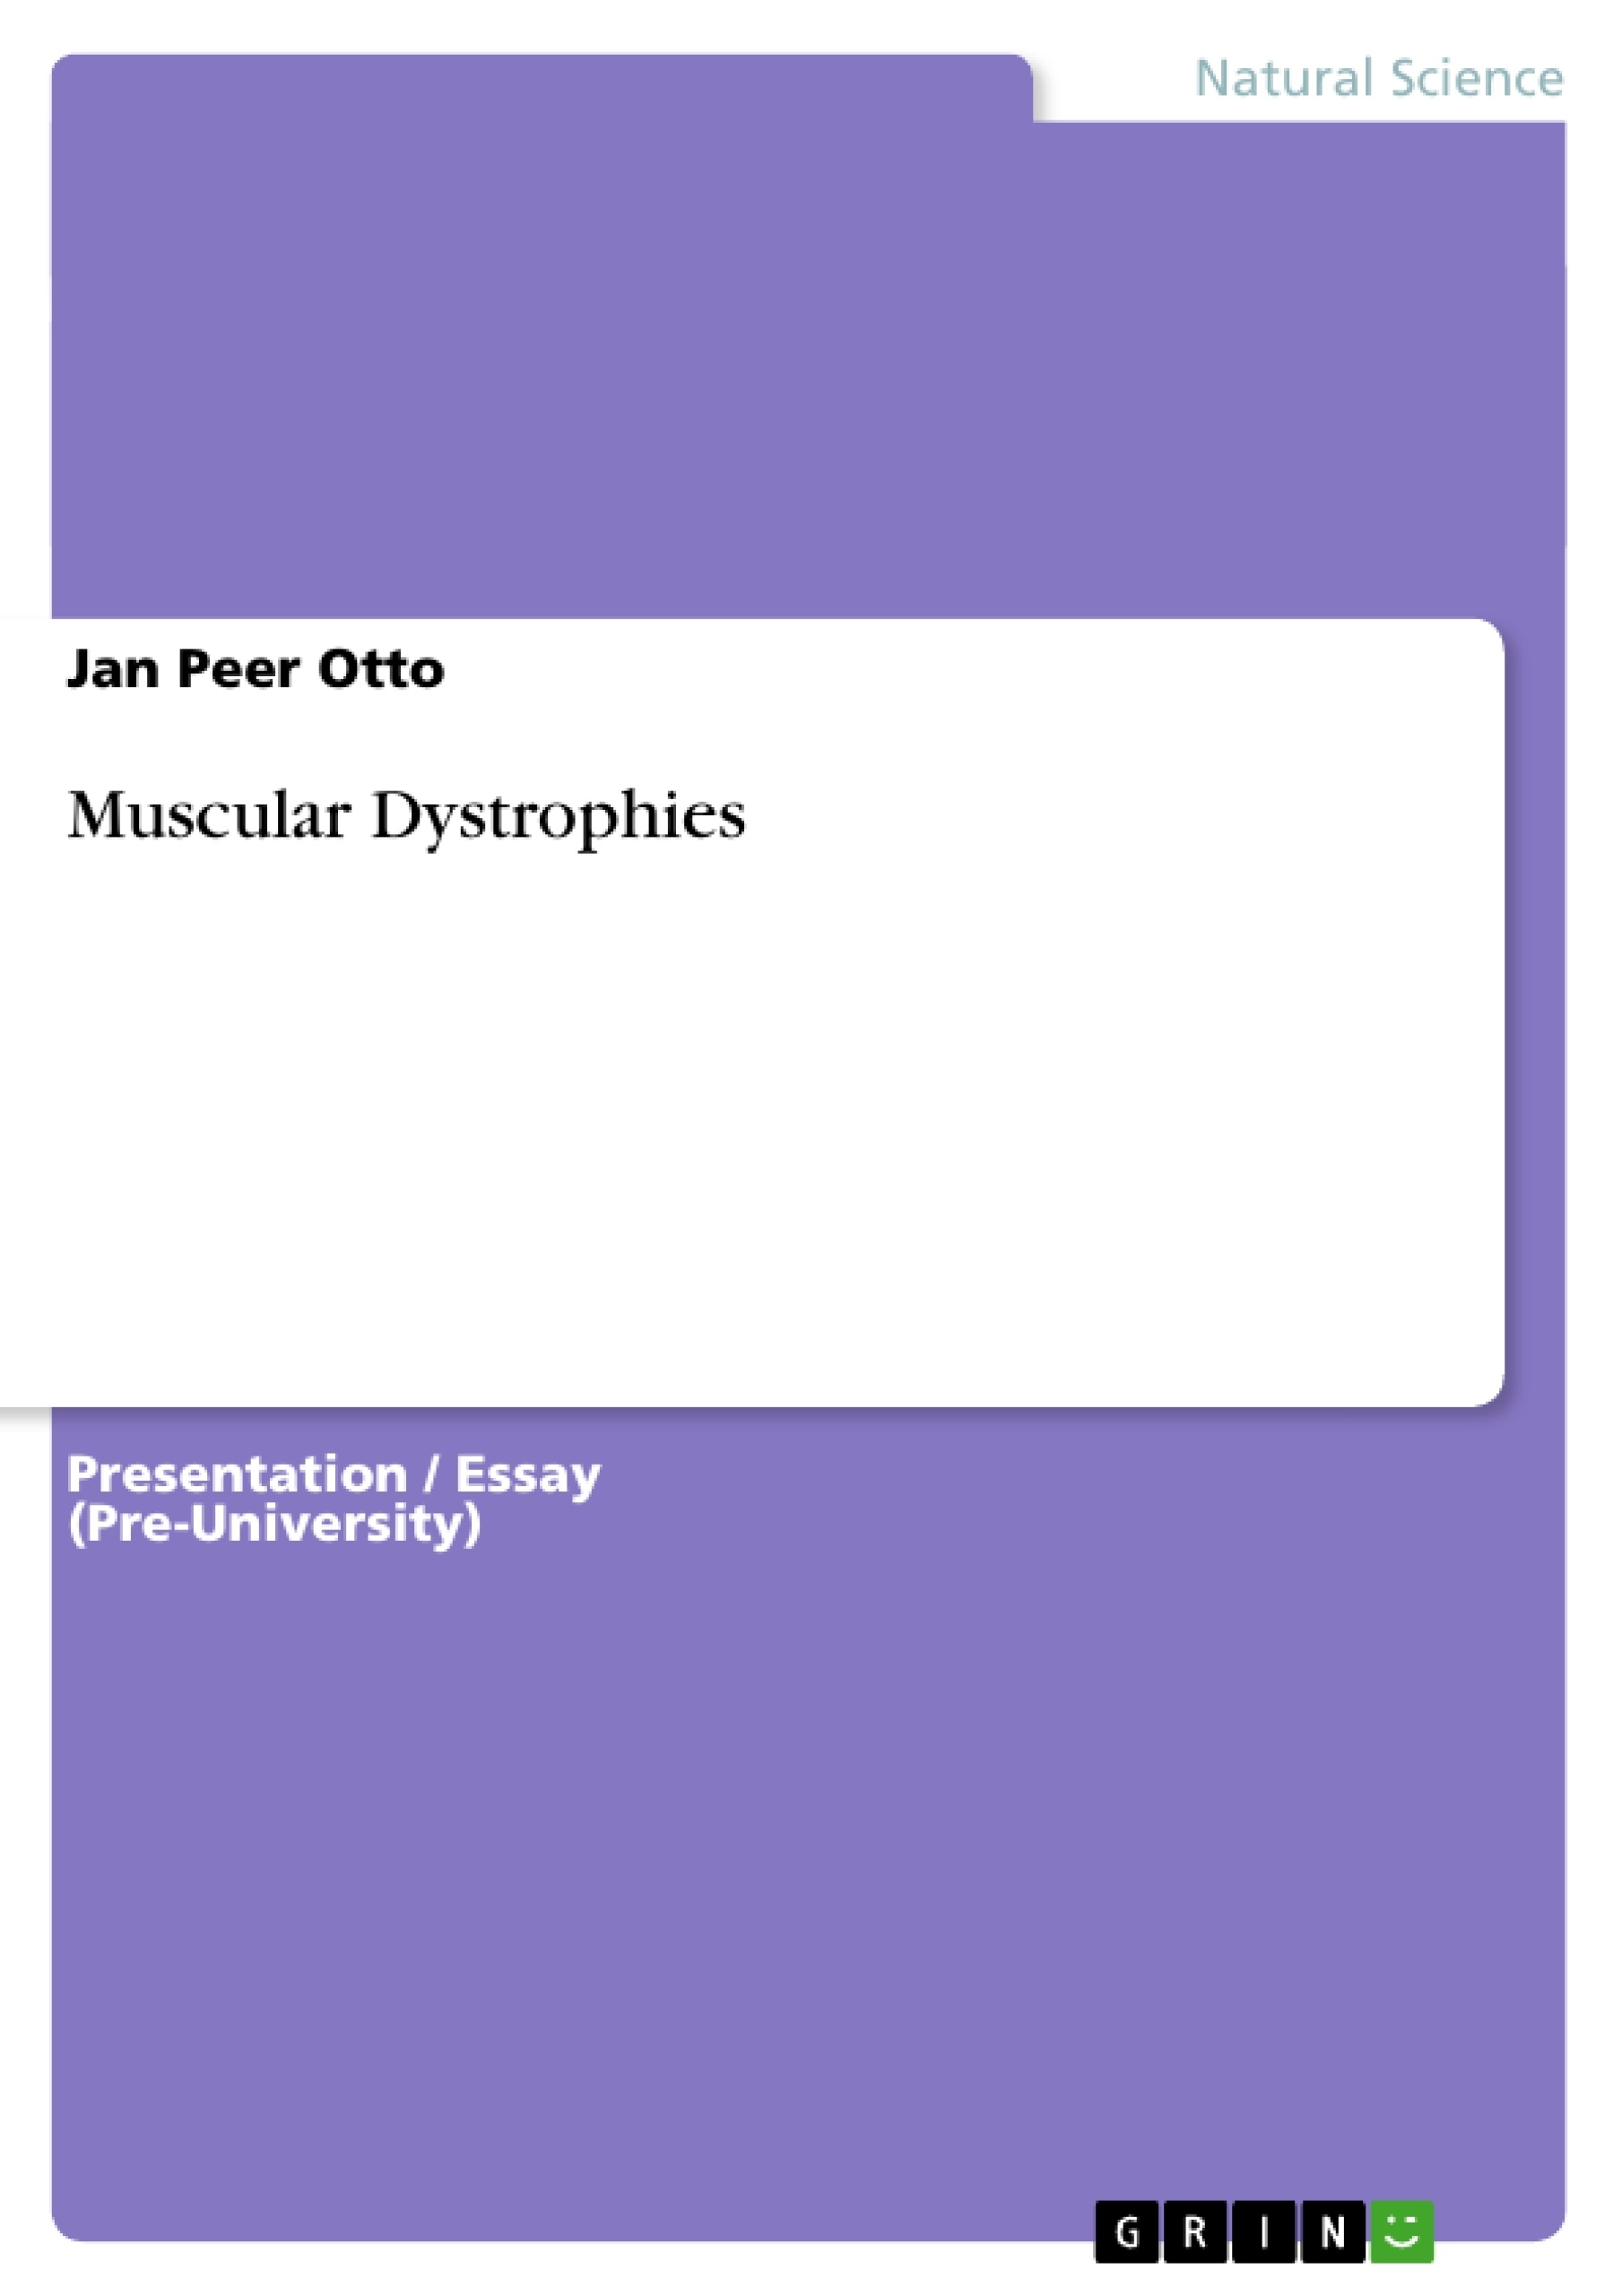 Title: Muscular Dystrophies